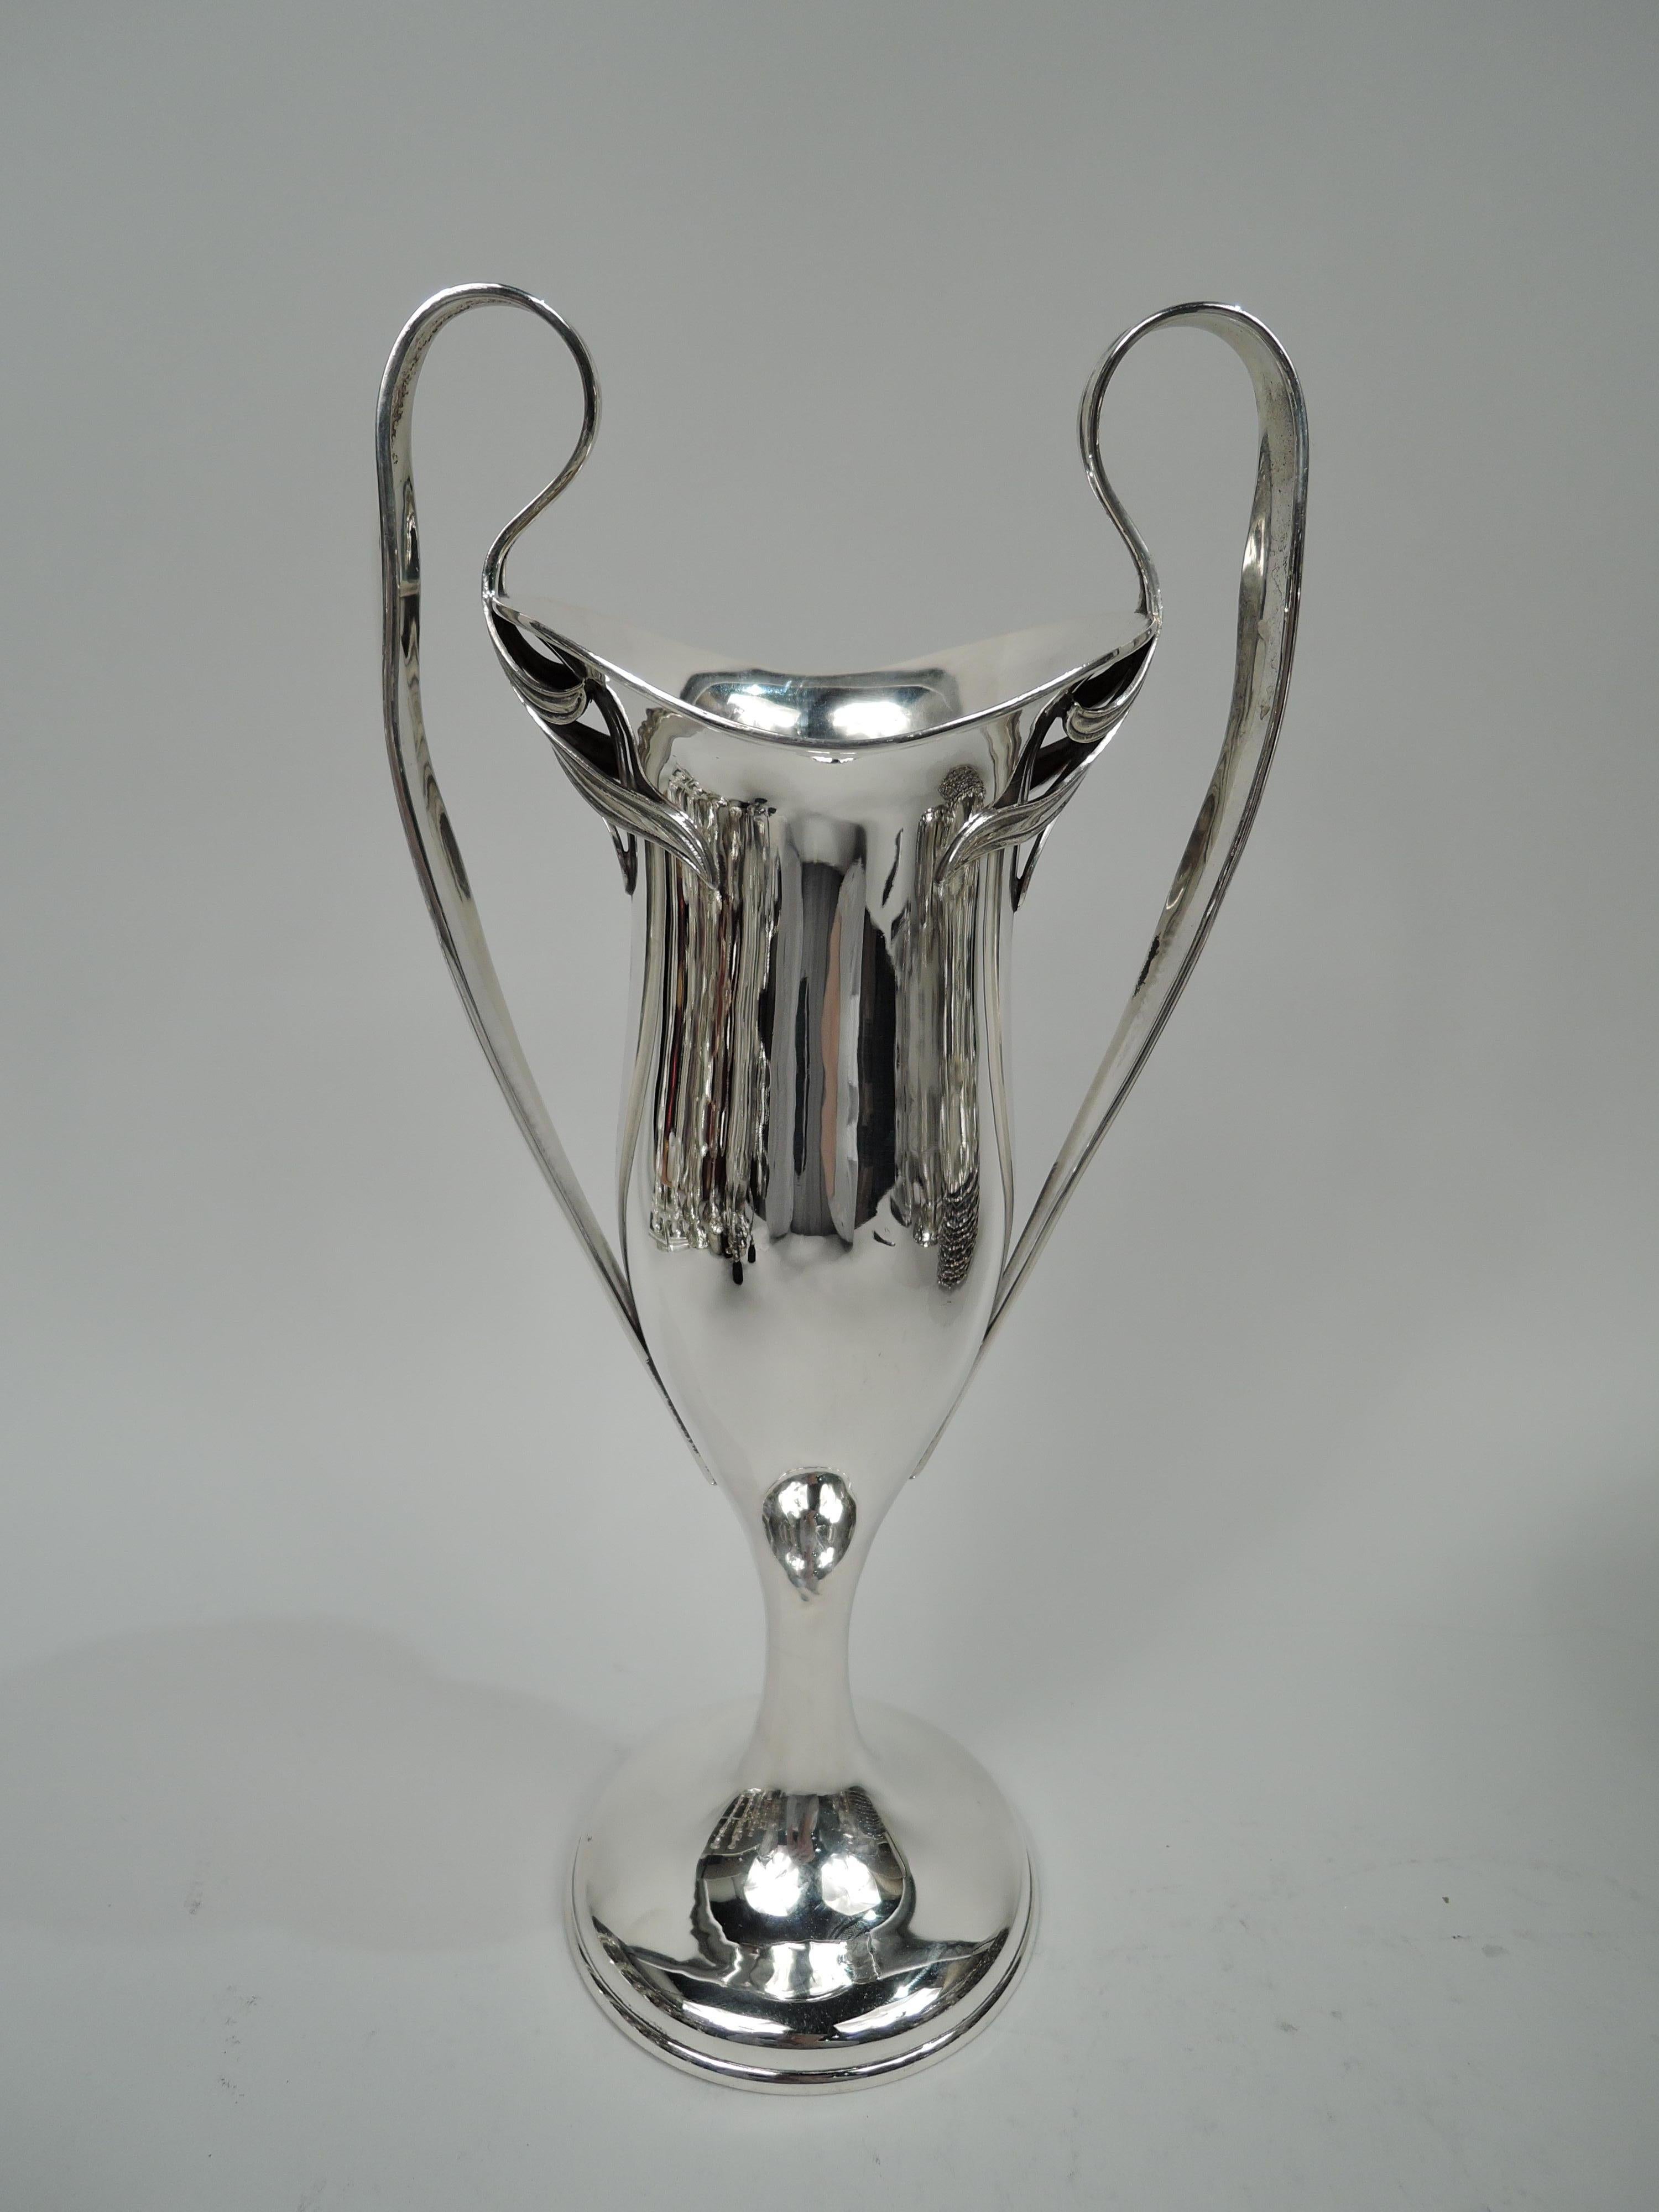 Stylish turn-of-the-century Art Nouveau sterling silver vase. Made by Barbour Silver Co. (part of International Silver Co.) in Hartford. Tall and elongated body with swooping asymmetrical mouth flowing into cylindrical support on domed foot.